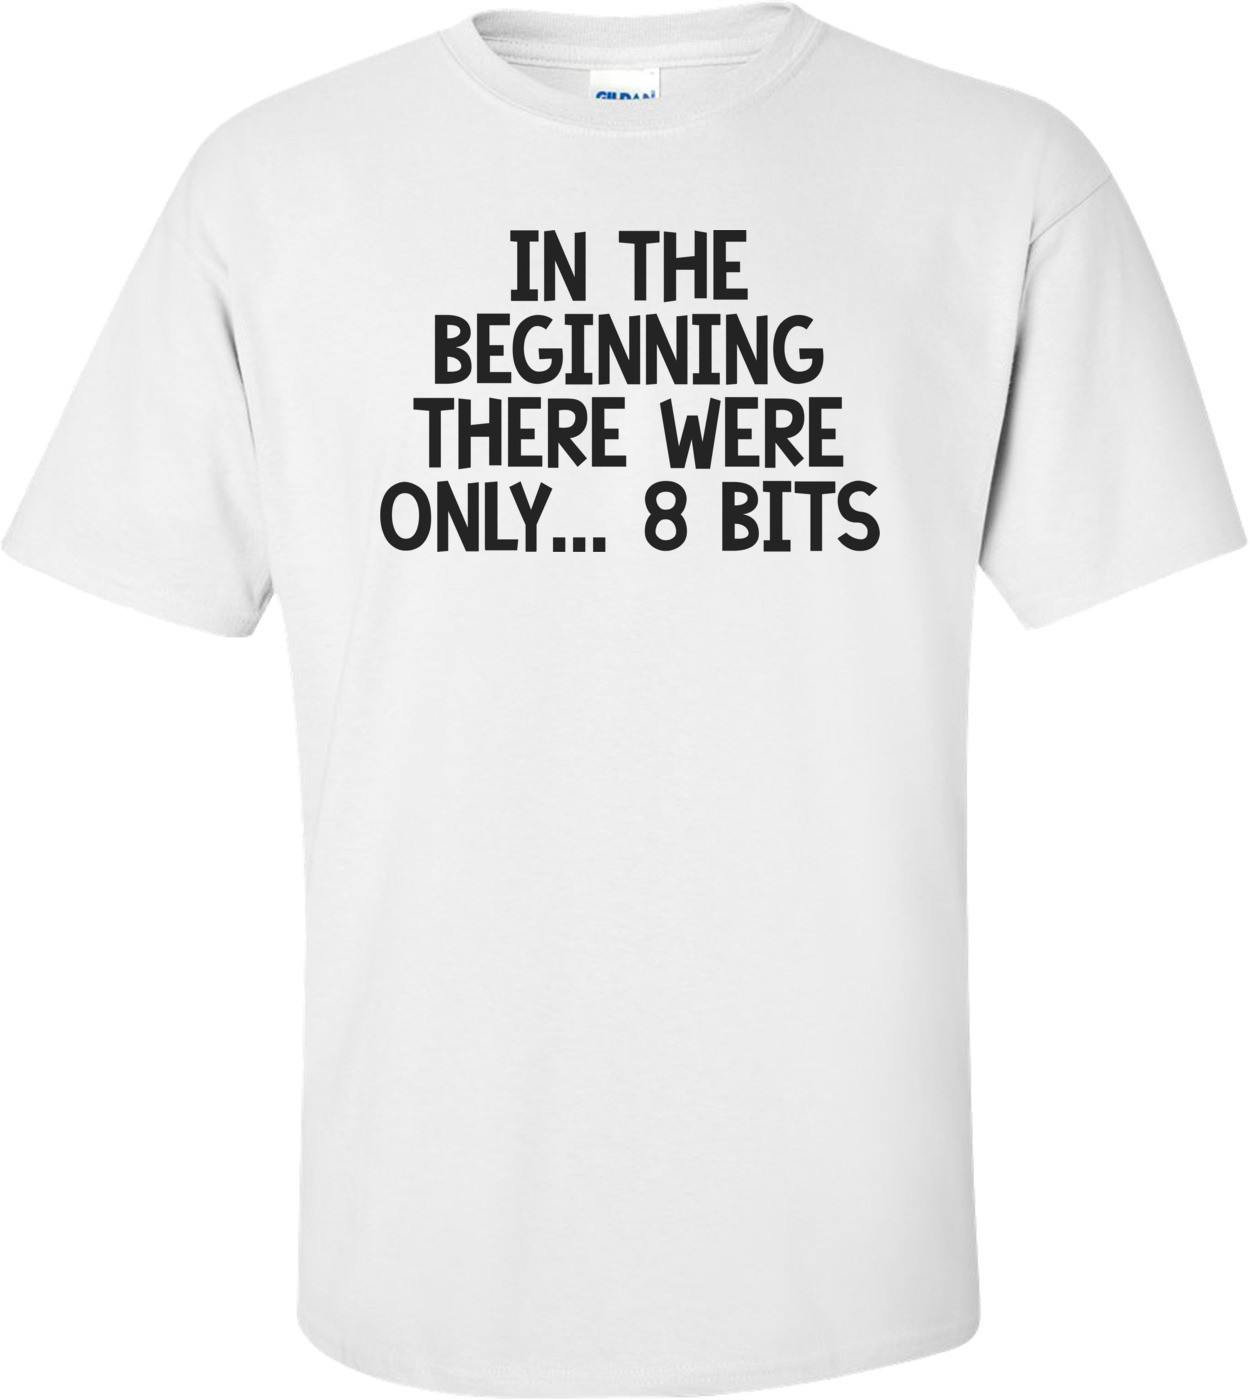 IN THE BEGINNING THERE WERE ONLY... 8 BITS Shirt